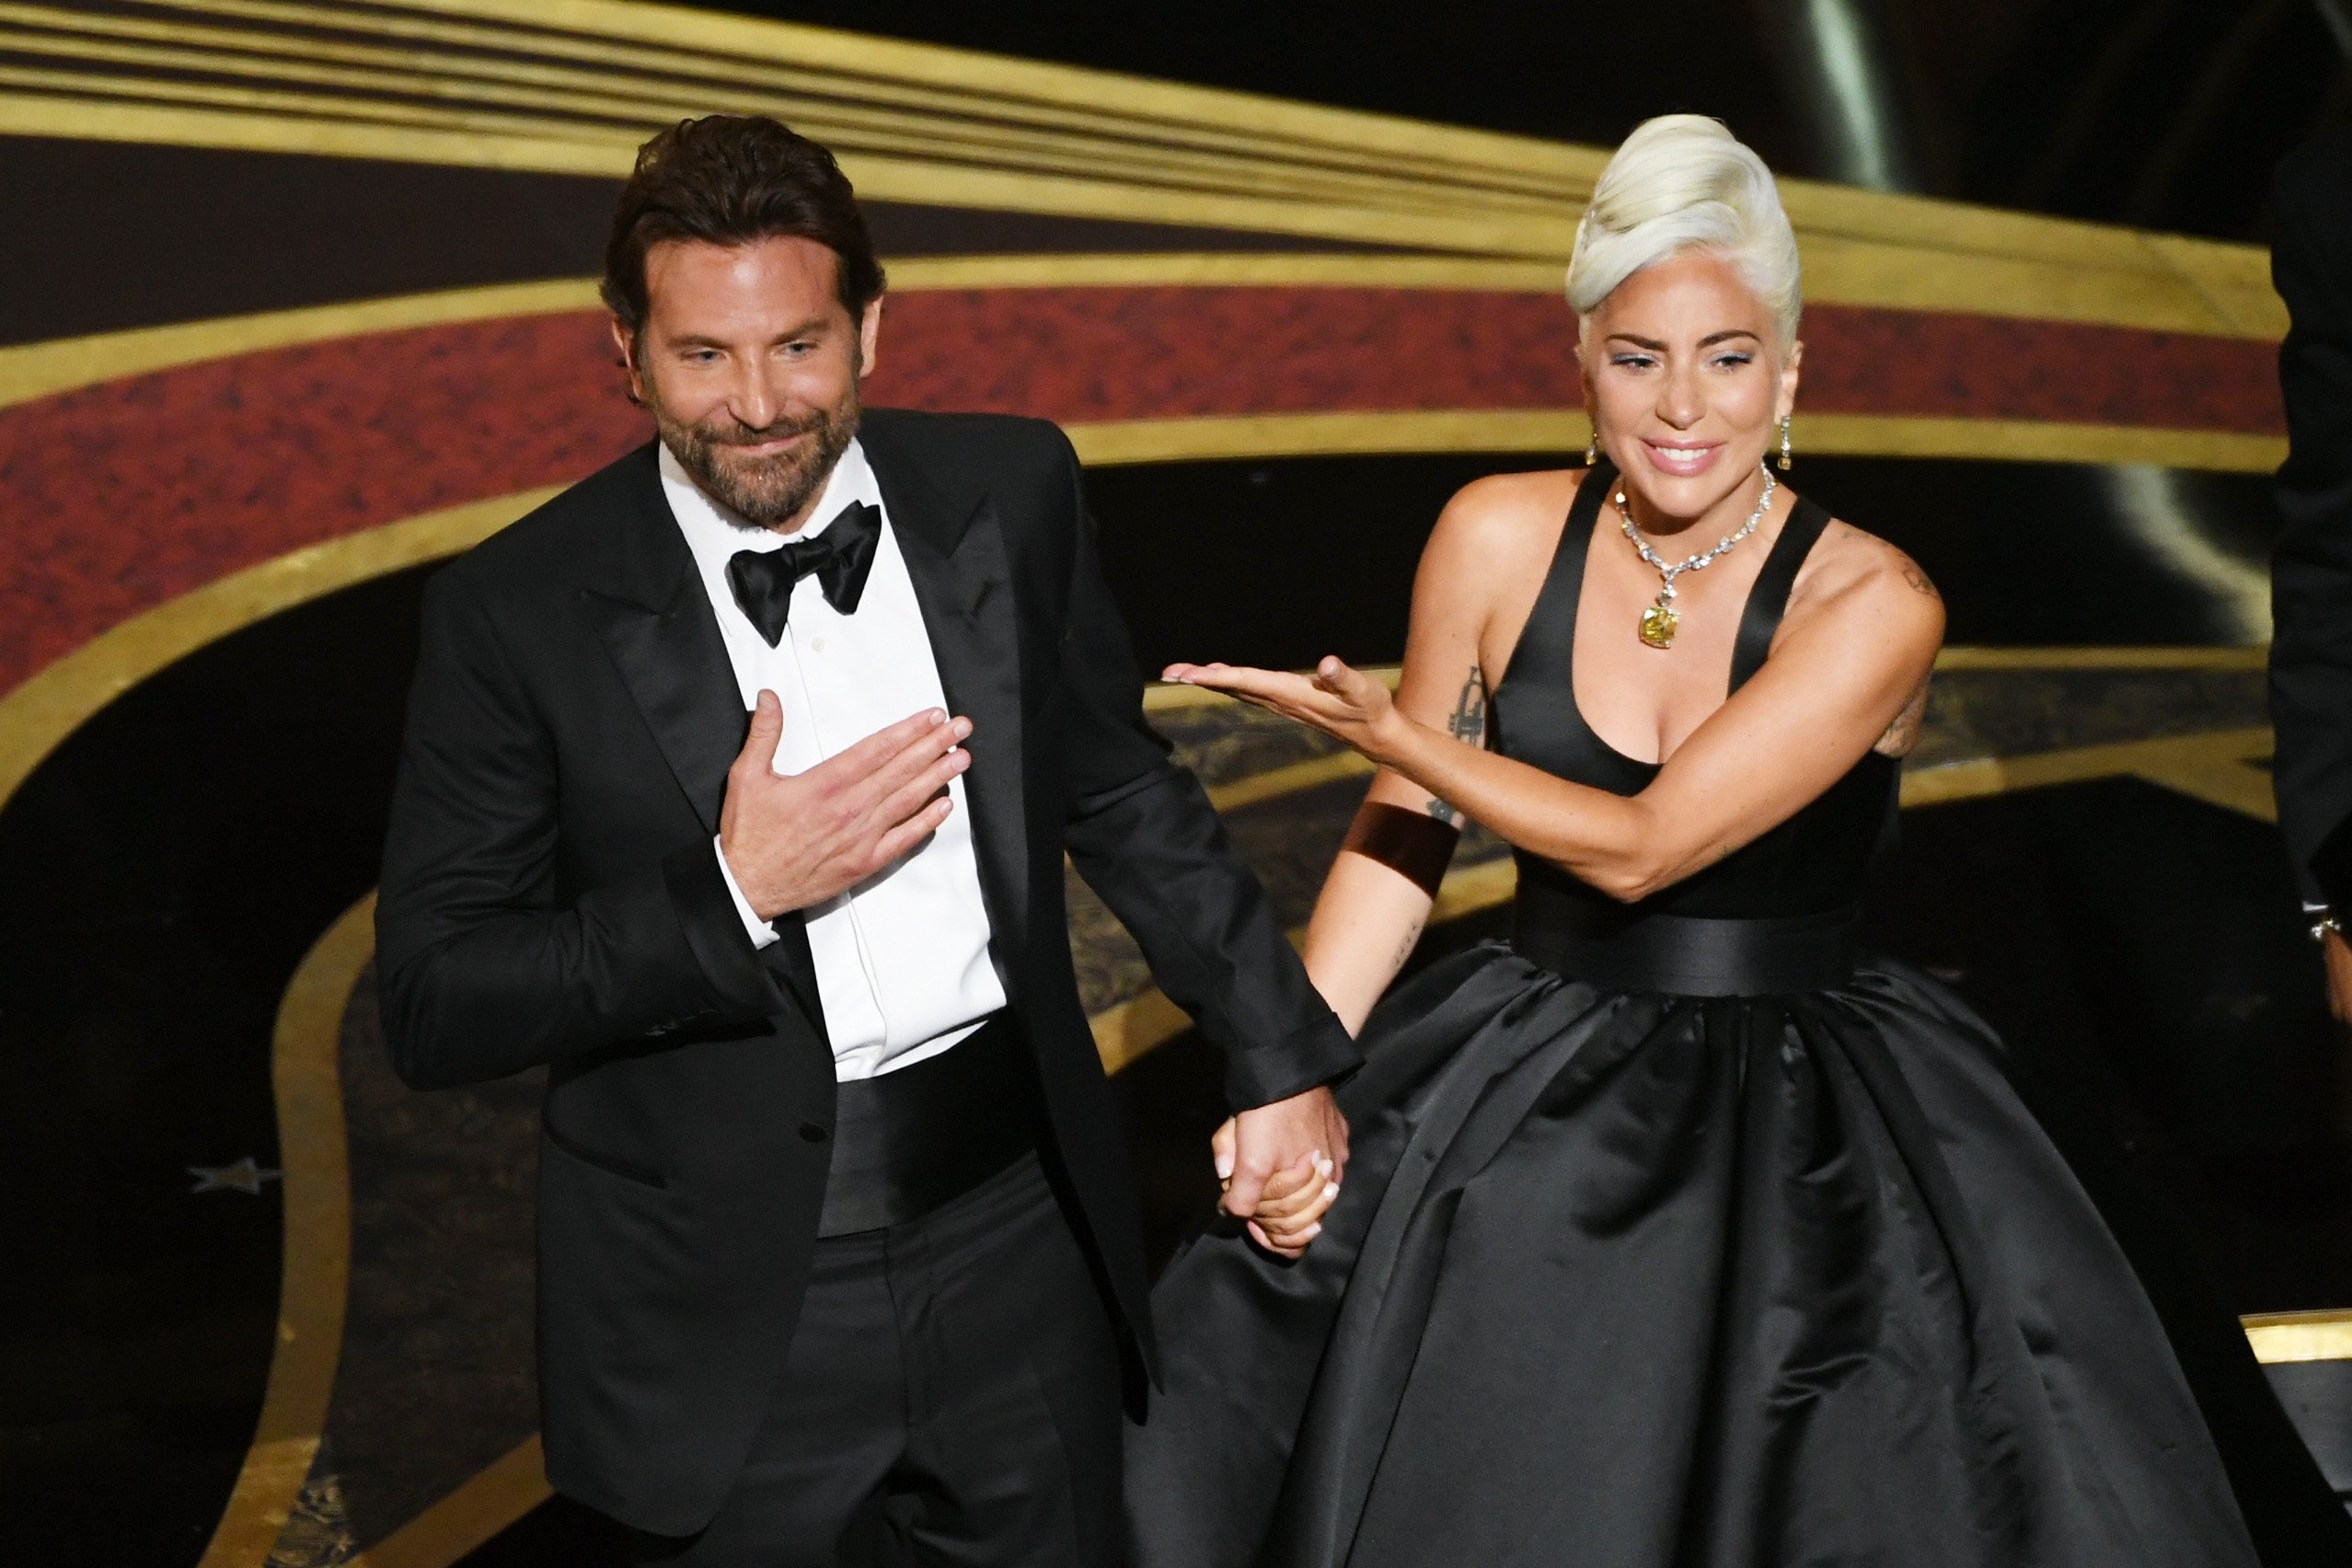 Bradley Cooper and Lady Gaga after performing "Shallow" at the Academy Awards | Photo: Getty Images